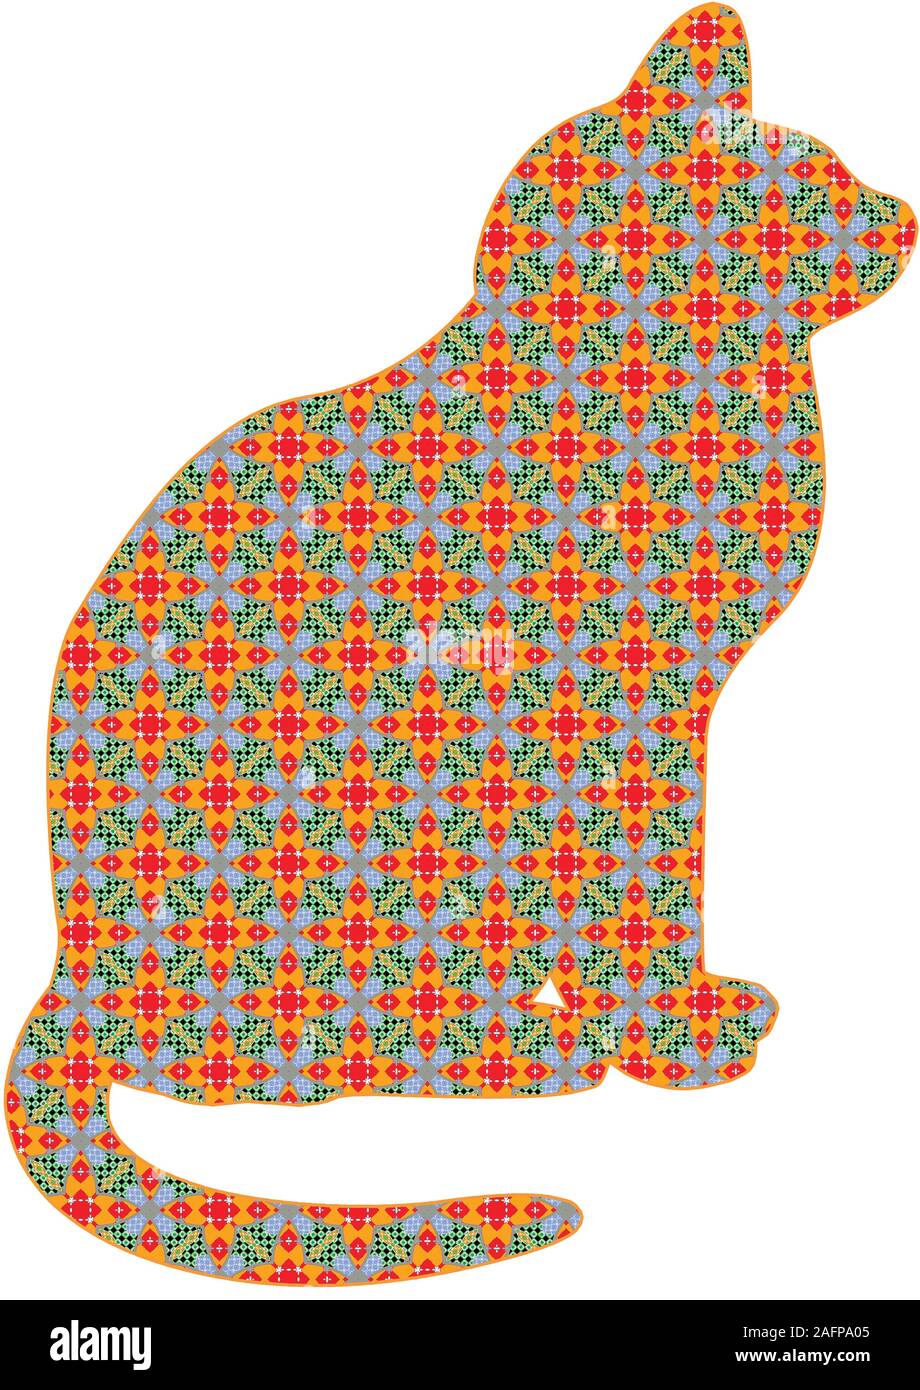 Charming red and green patterned Christmas cat for the holiday season, a quirky and fun artistic graphic design resource cut out isolated on white Stock Photo